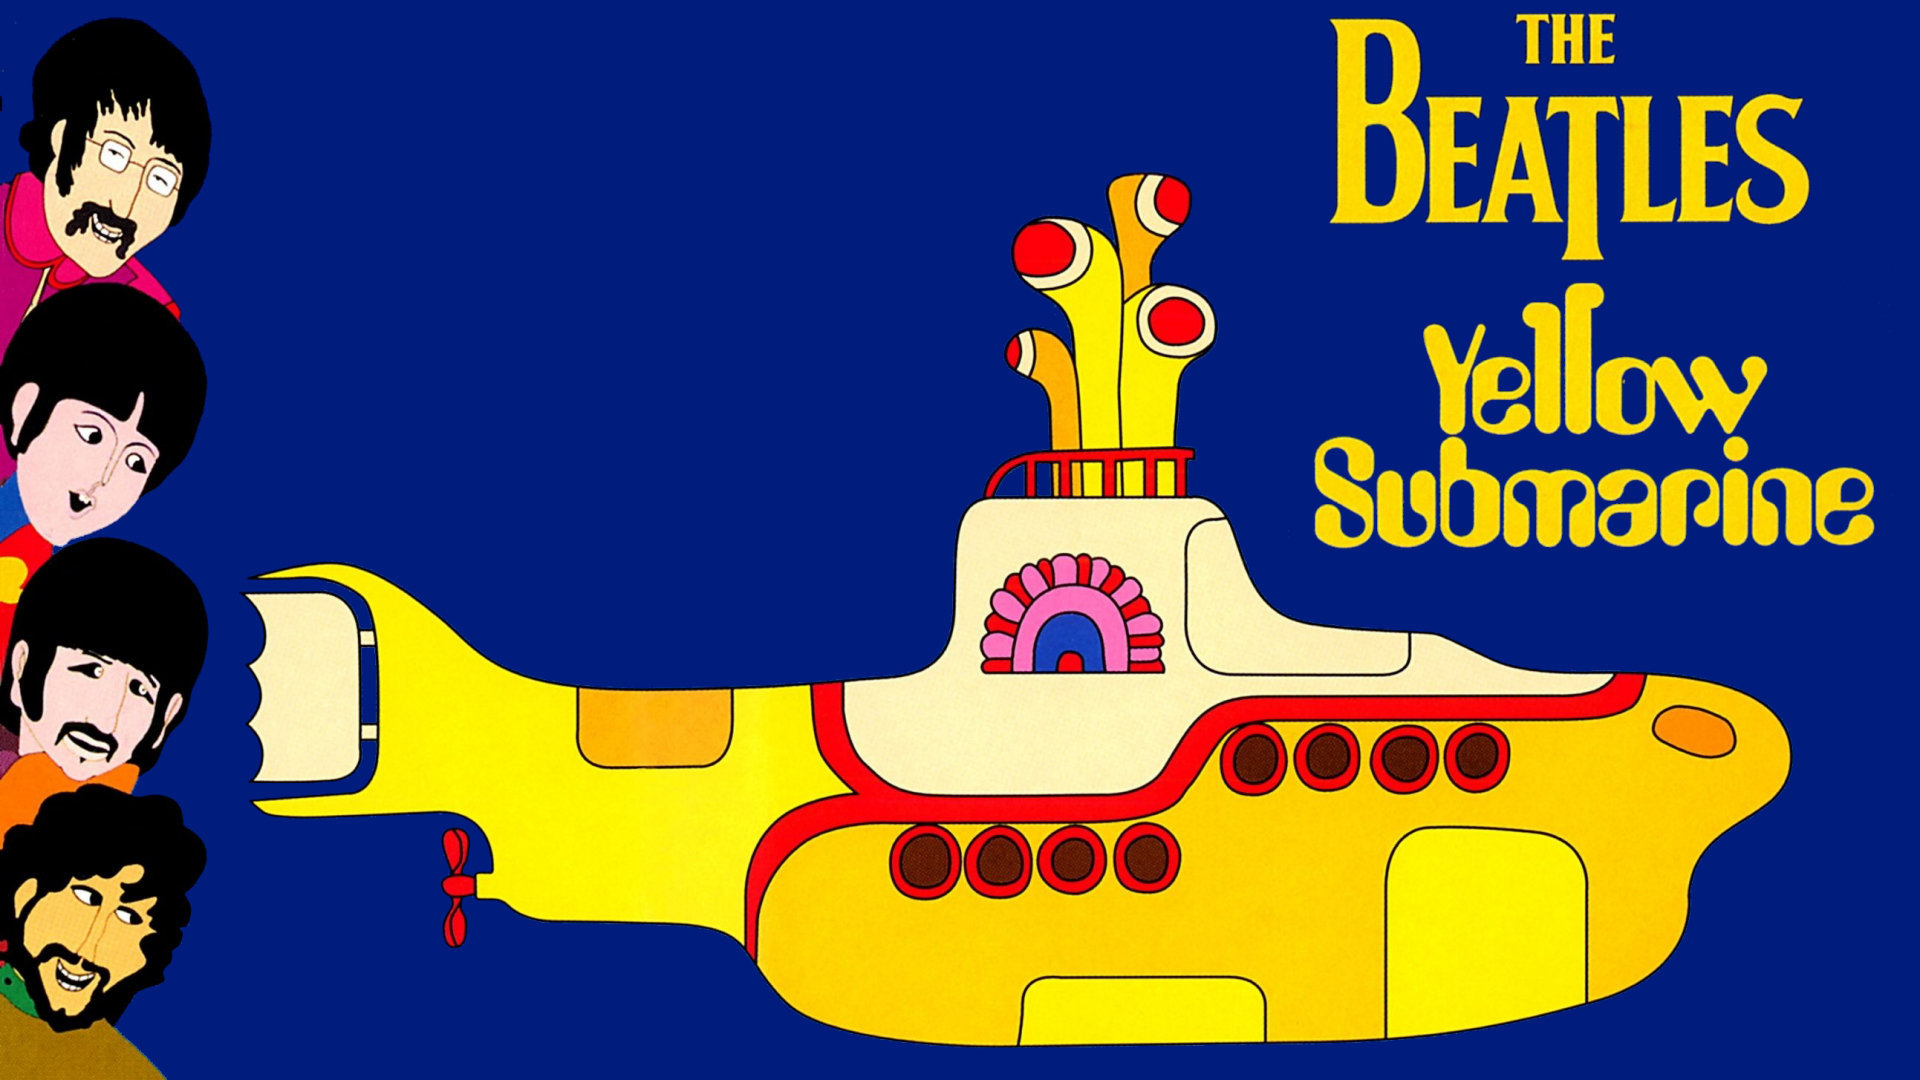 The Beatles In Yellow Submarine HD Wallpaper Background Image